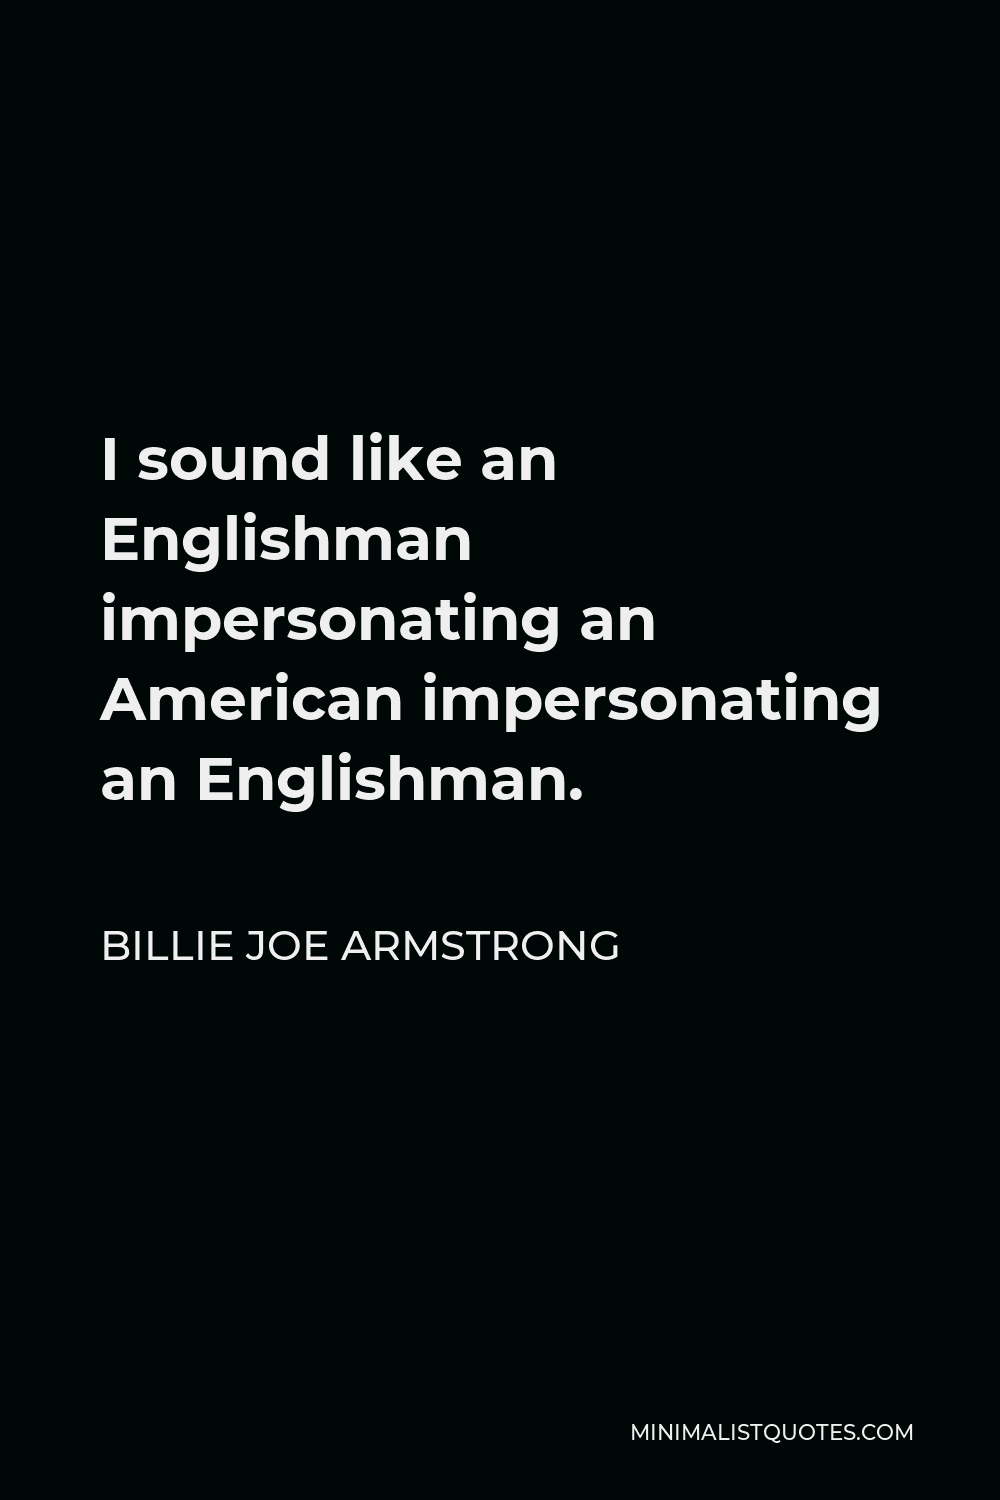 Billie Joe Armstrong Quote - I sound like an Englishman impersonating an American impersonating an Englishman.